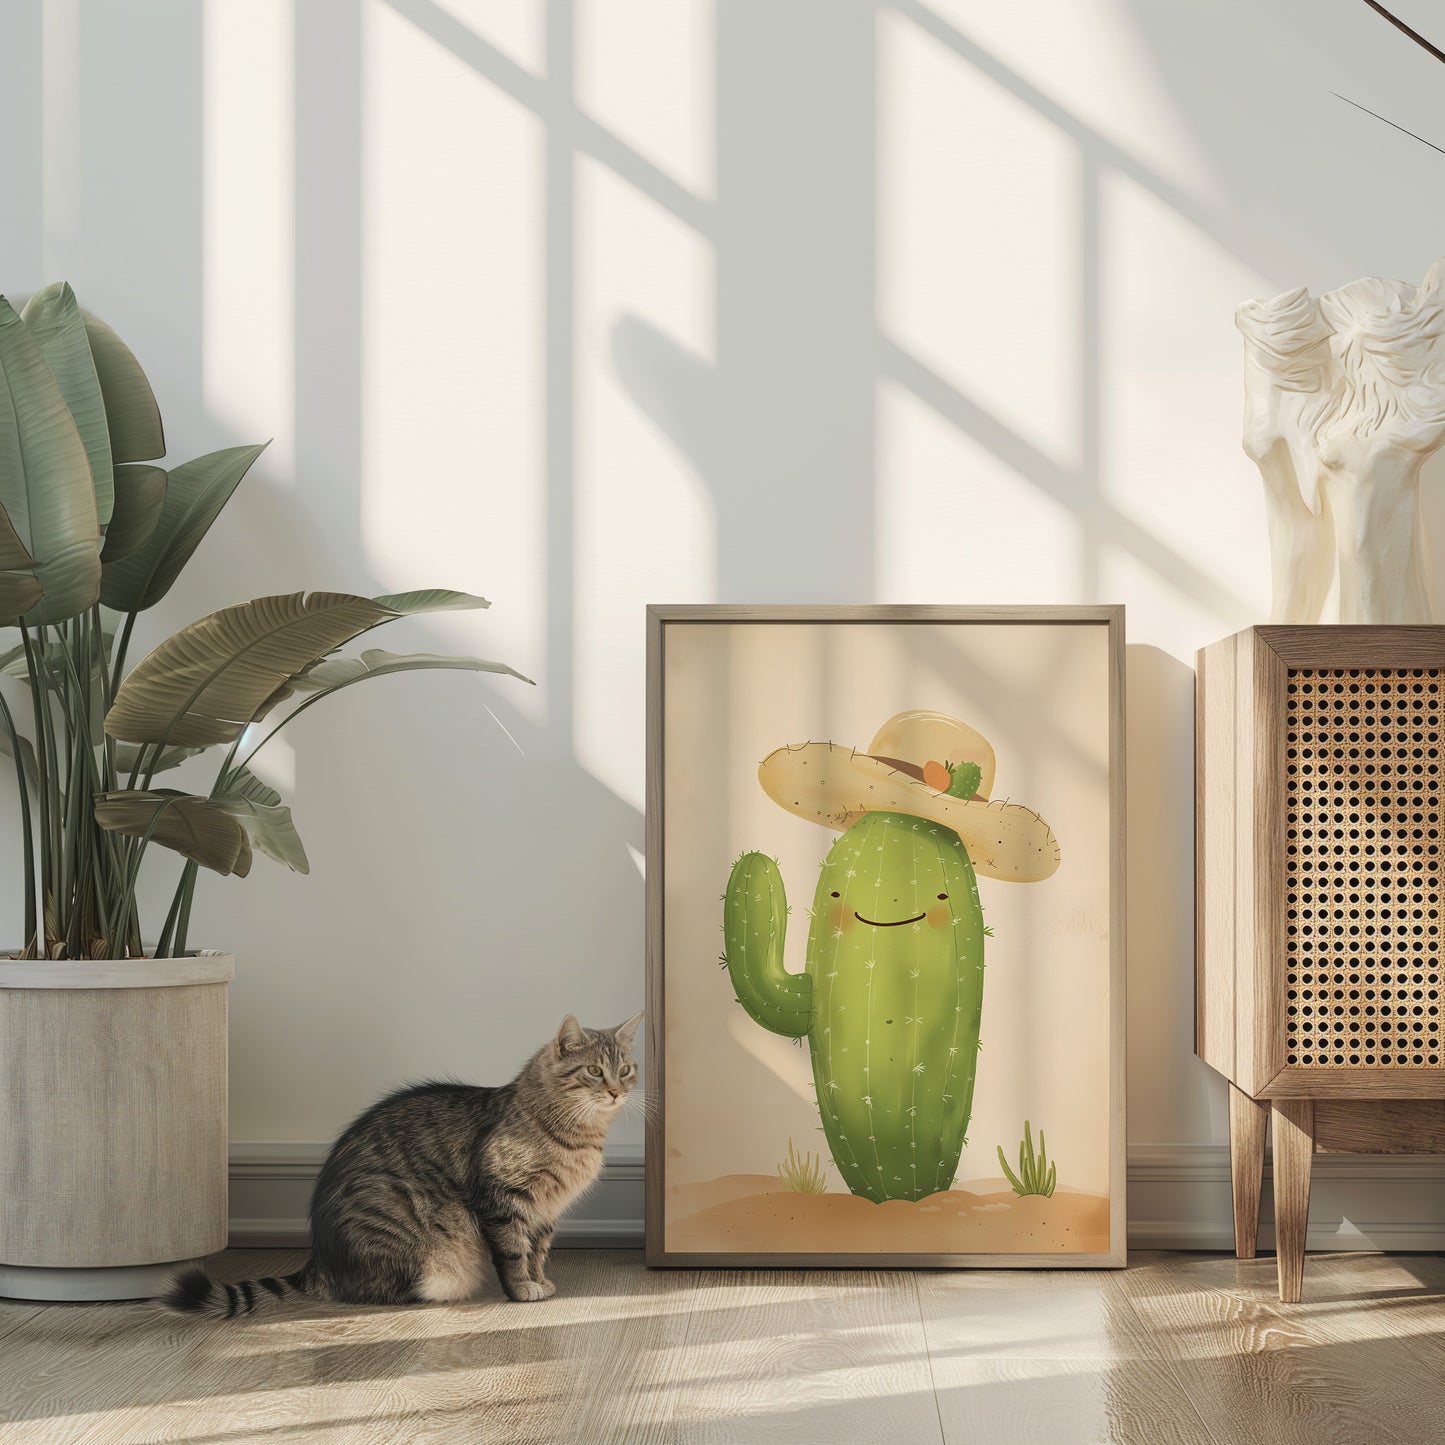 Cat sitting next to a framed picture of a cactus with a hat on the floor inside a house.